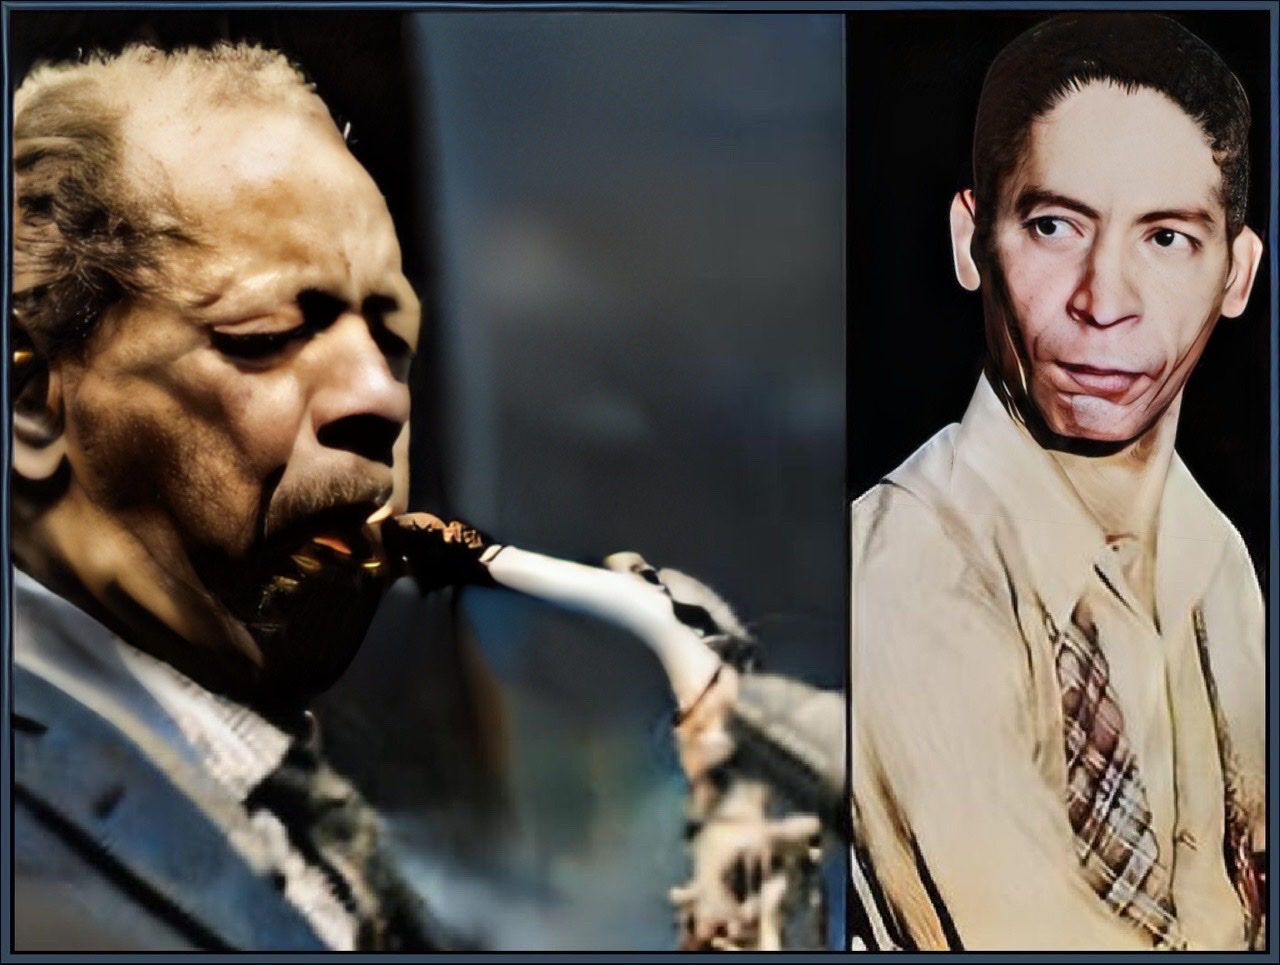 A diptych of Ornette Coleman playing his saxophone on left with Jelly Roll Morton with a querulous look on right staring back at Coleman on left in a colorized photo.